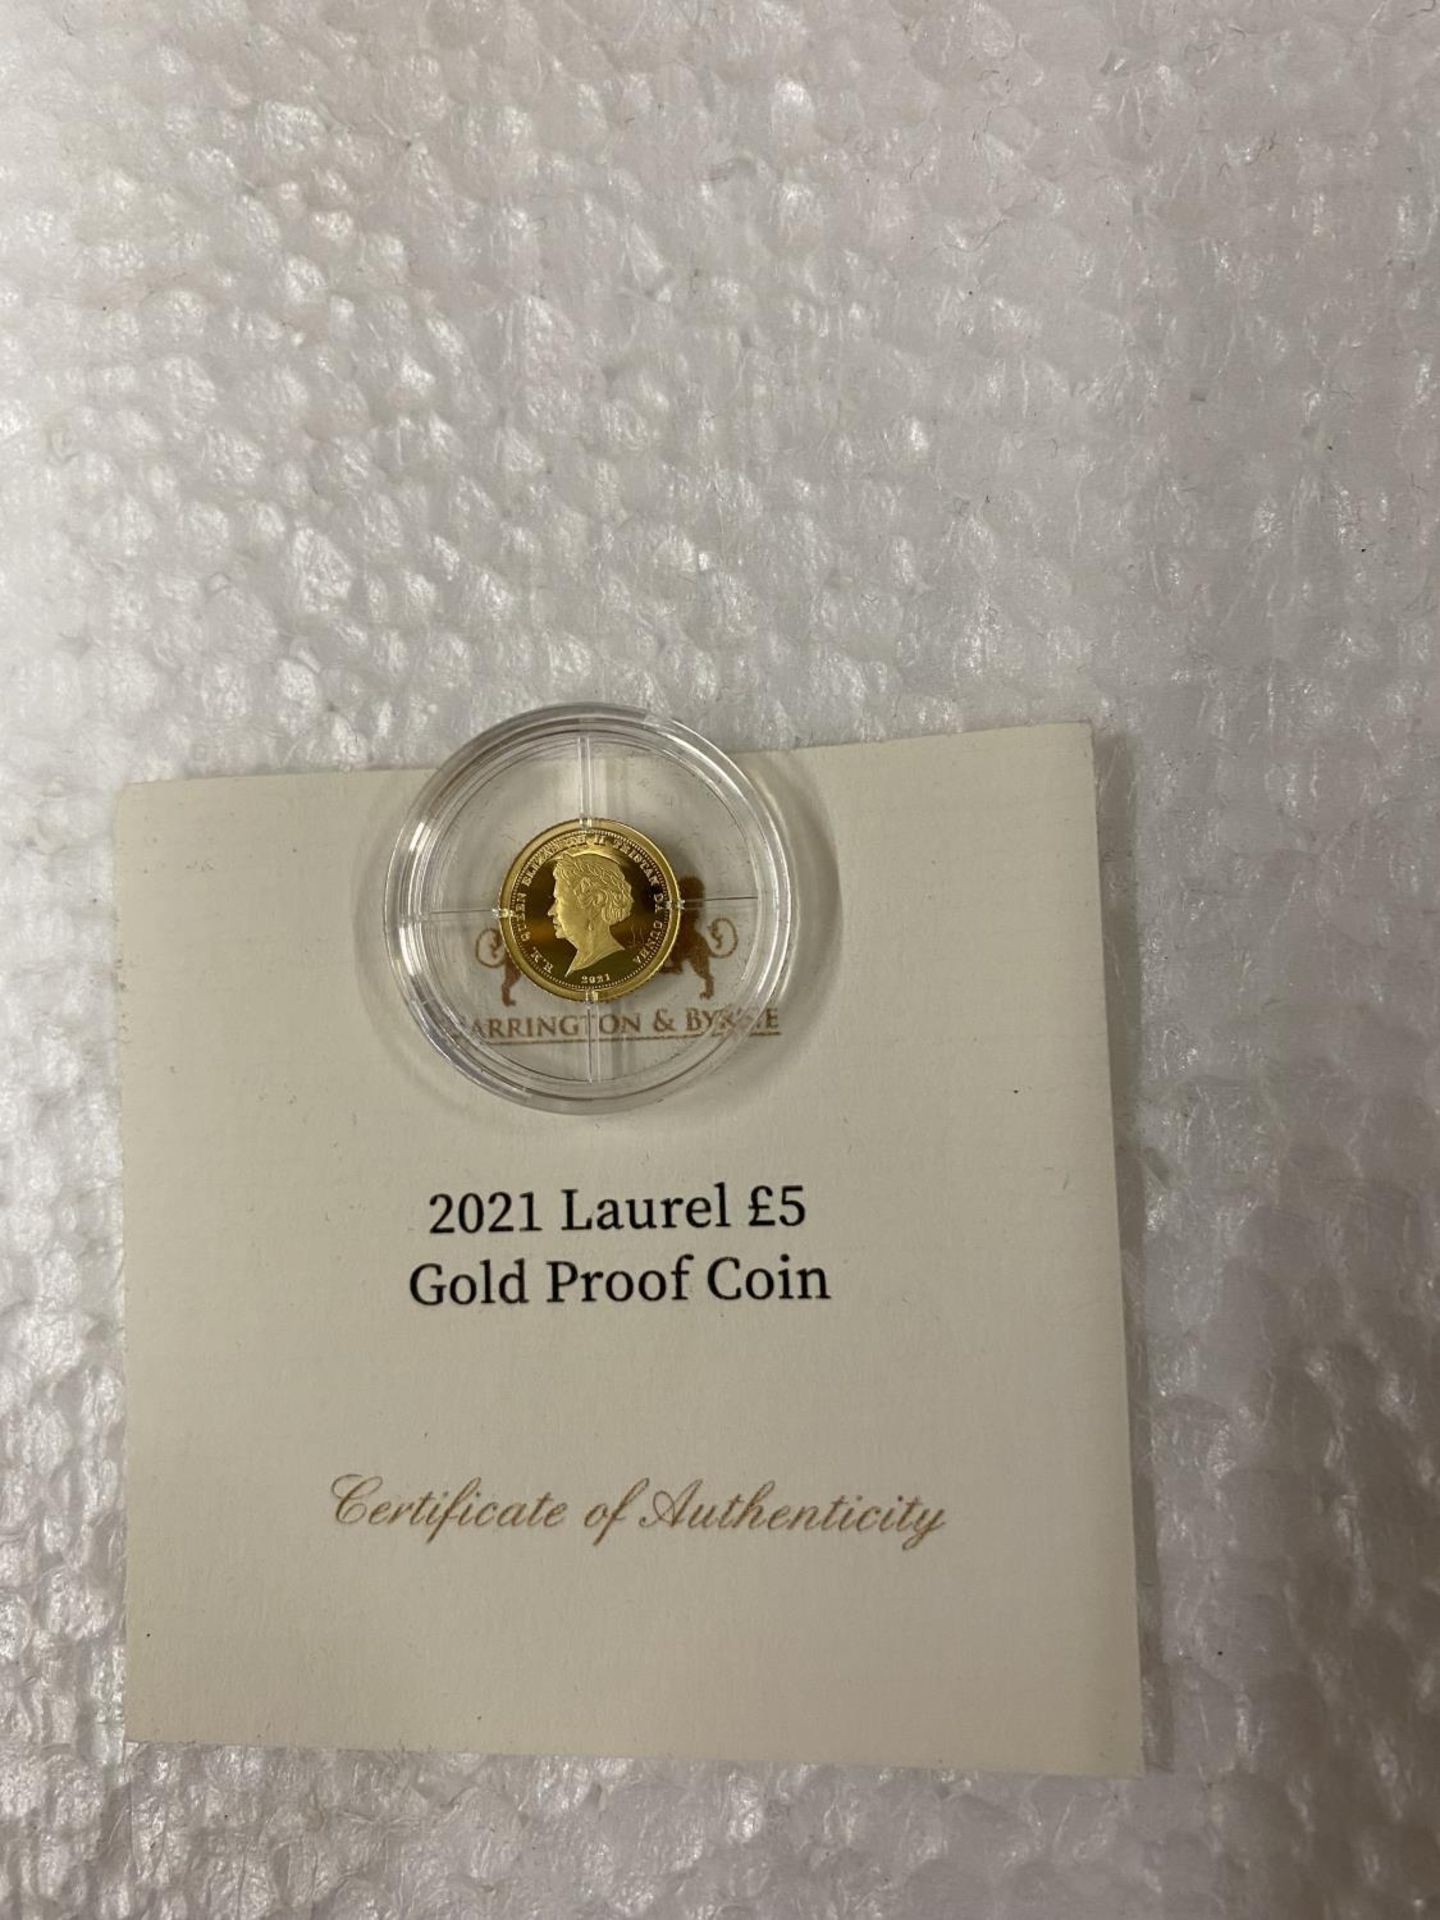 TDC “2021 LAUREL £5” A 24 CARAT GOLD PROOF COIN WITH COA. THE COIN WEIGHS 0.5 GRAMS - Image 3 of 3